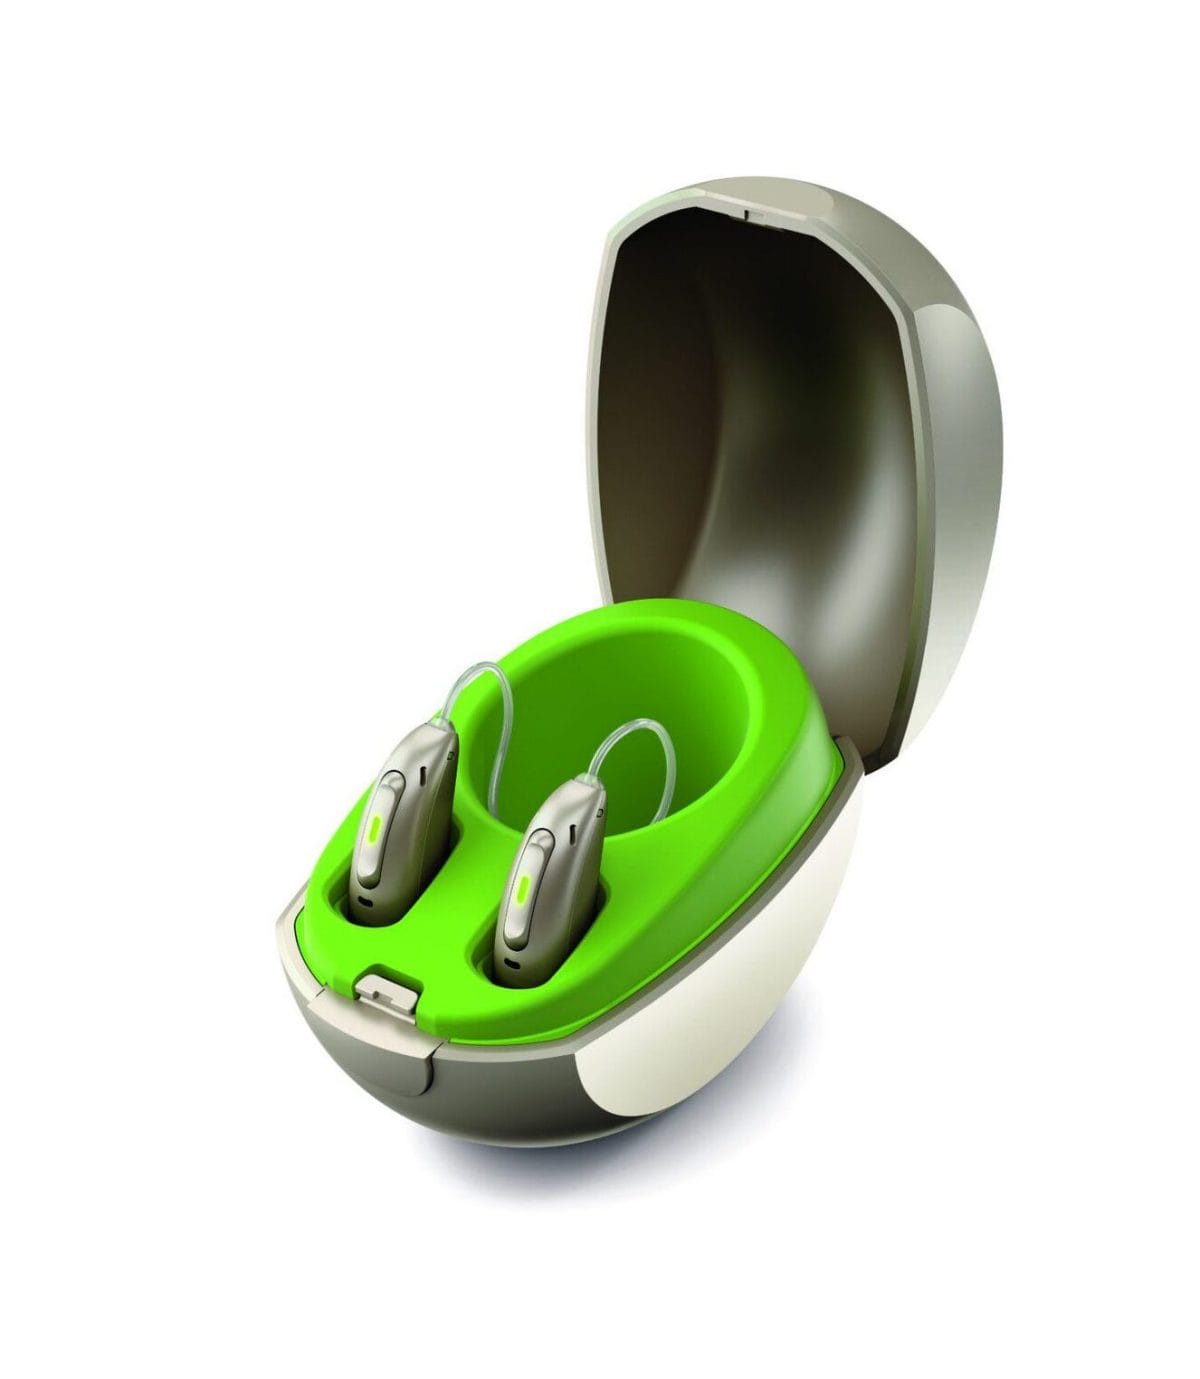 Phonak hearing instruments with Charger Case for charging